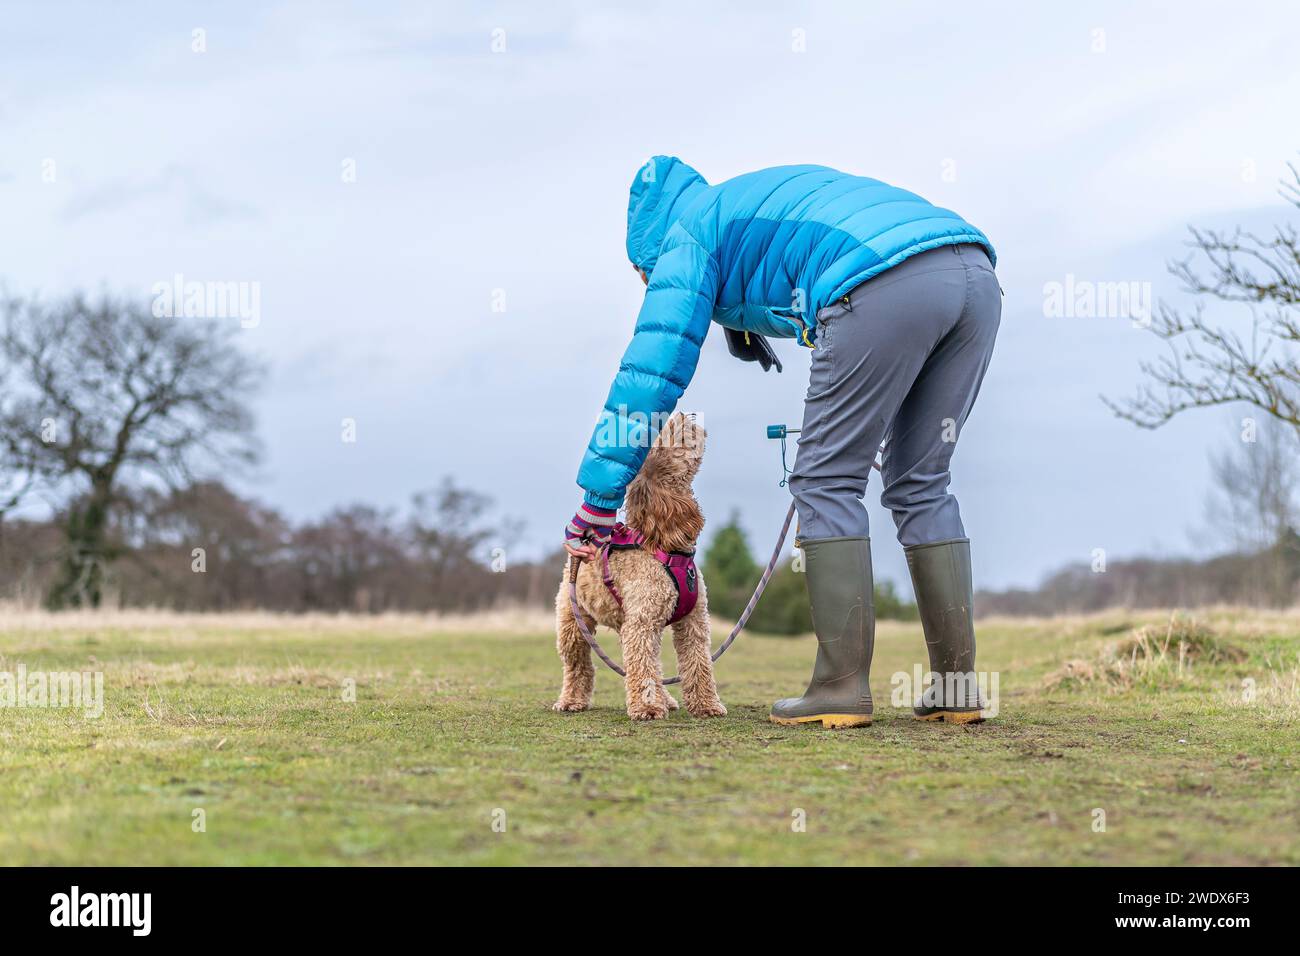 Playful cockerpoo dog looking up affectionately at their owner in open countryside. Stock Photo